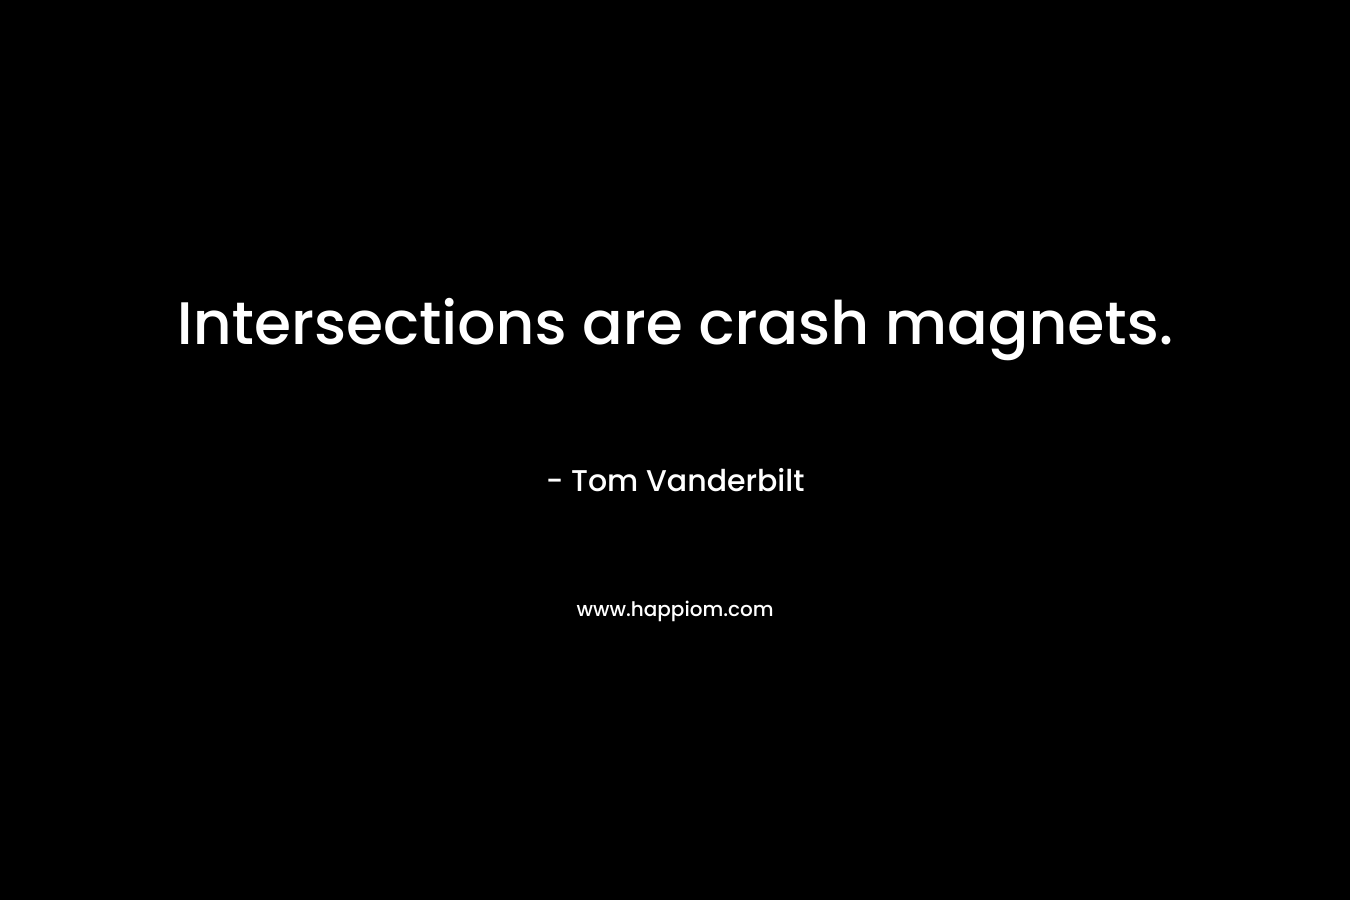 Intersections are crash magnets.